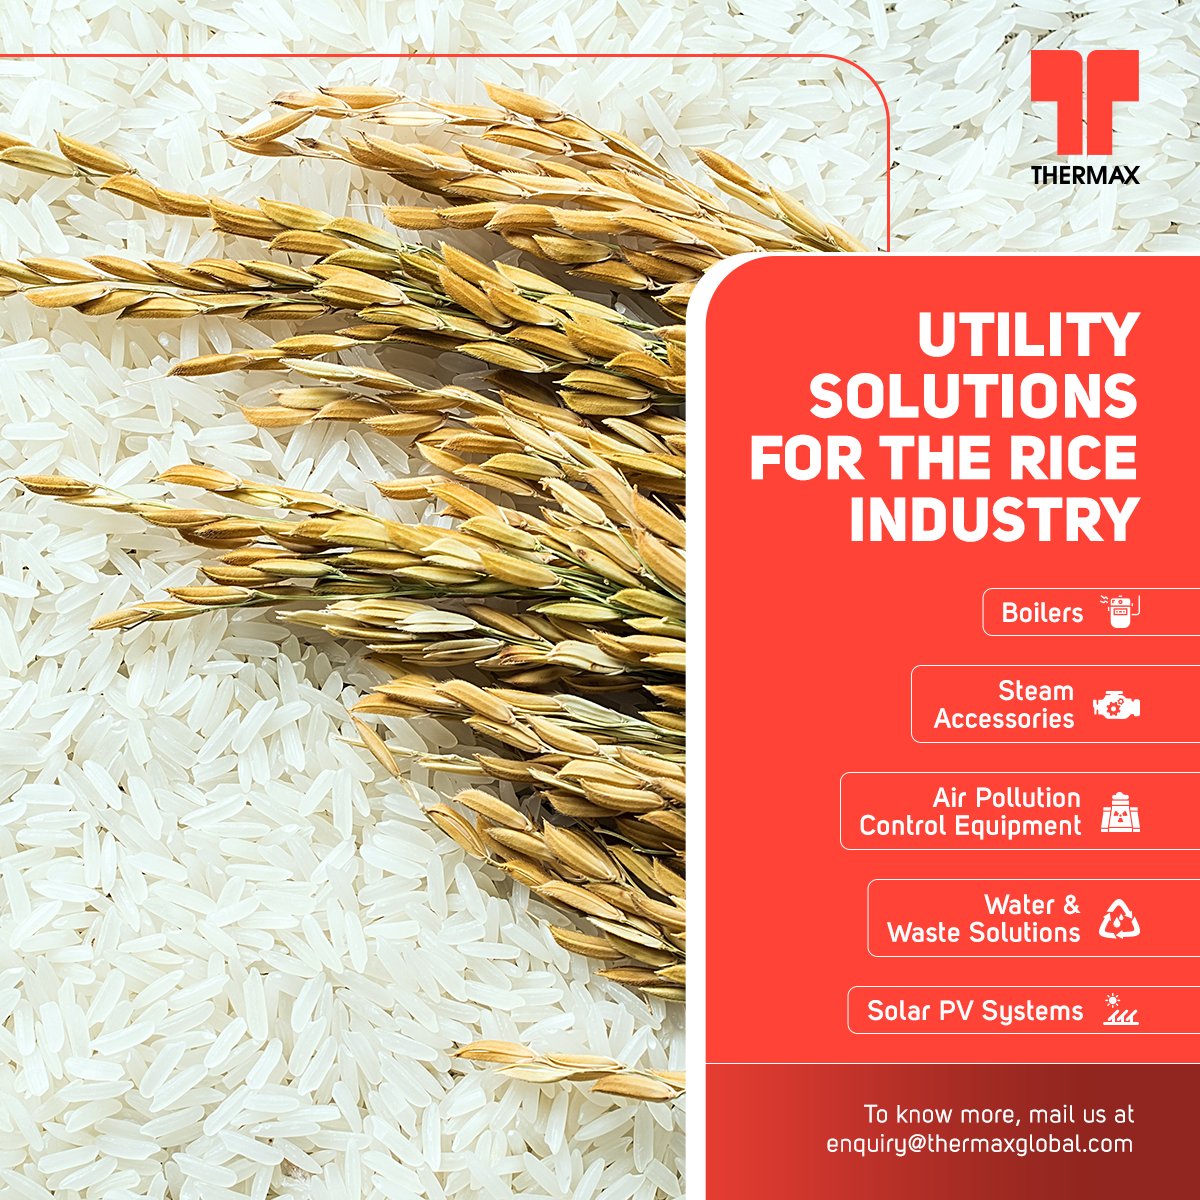 #Thermax suite of energy-efficient #utilitysolutions for rice millers helps you attain the desired quality of rice grains while making your processes #sustainable. To know more about our products, mail us at enquiry@thermaxglobal.com or visit thermaxglobal.com
#RiceIndustry